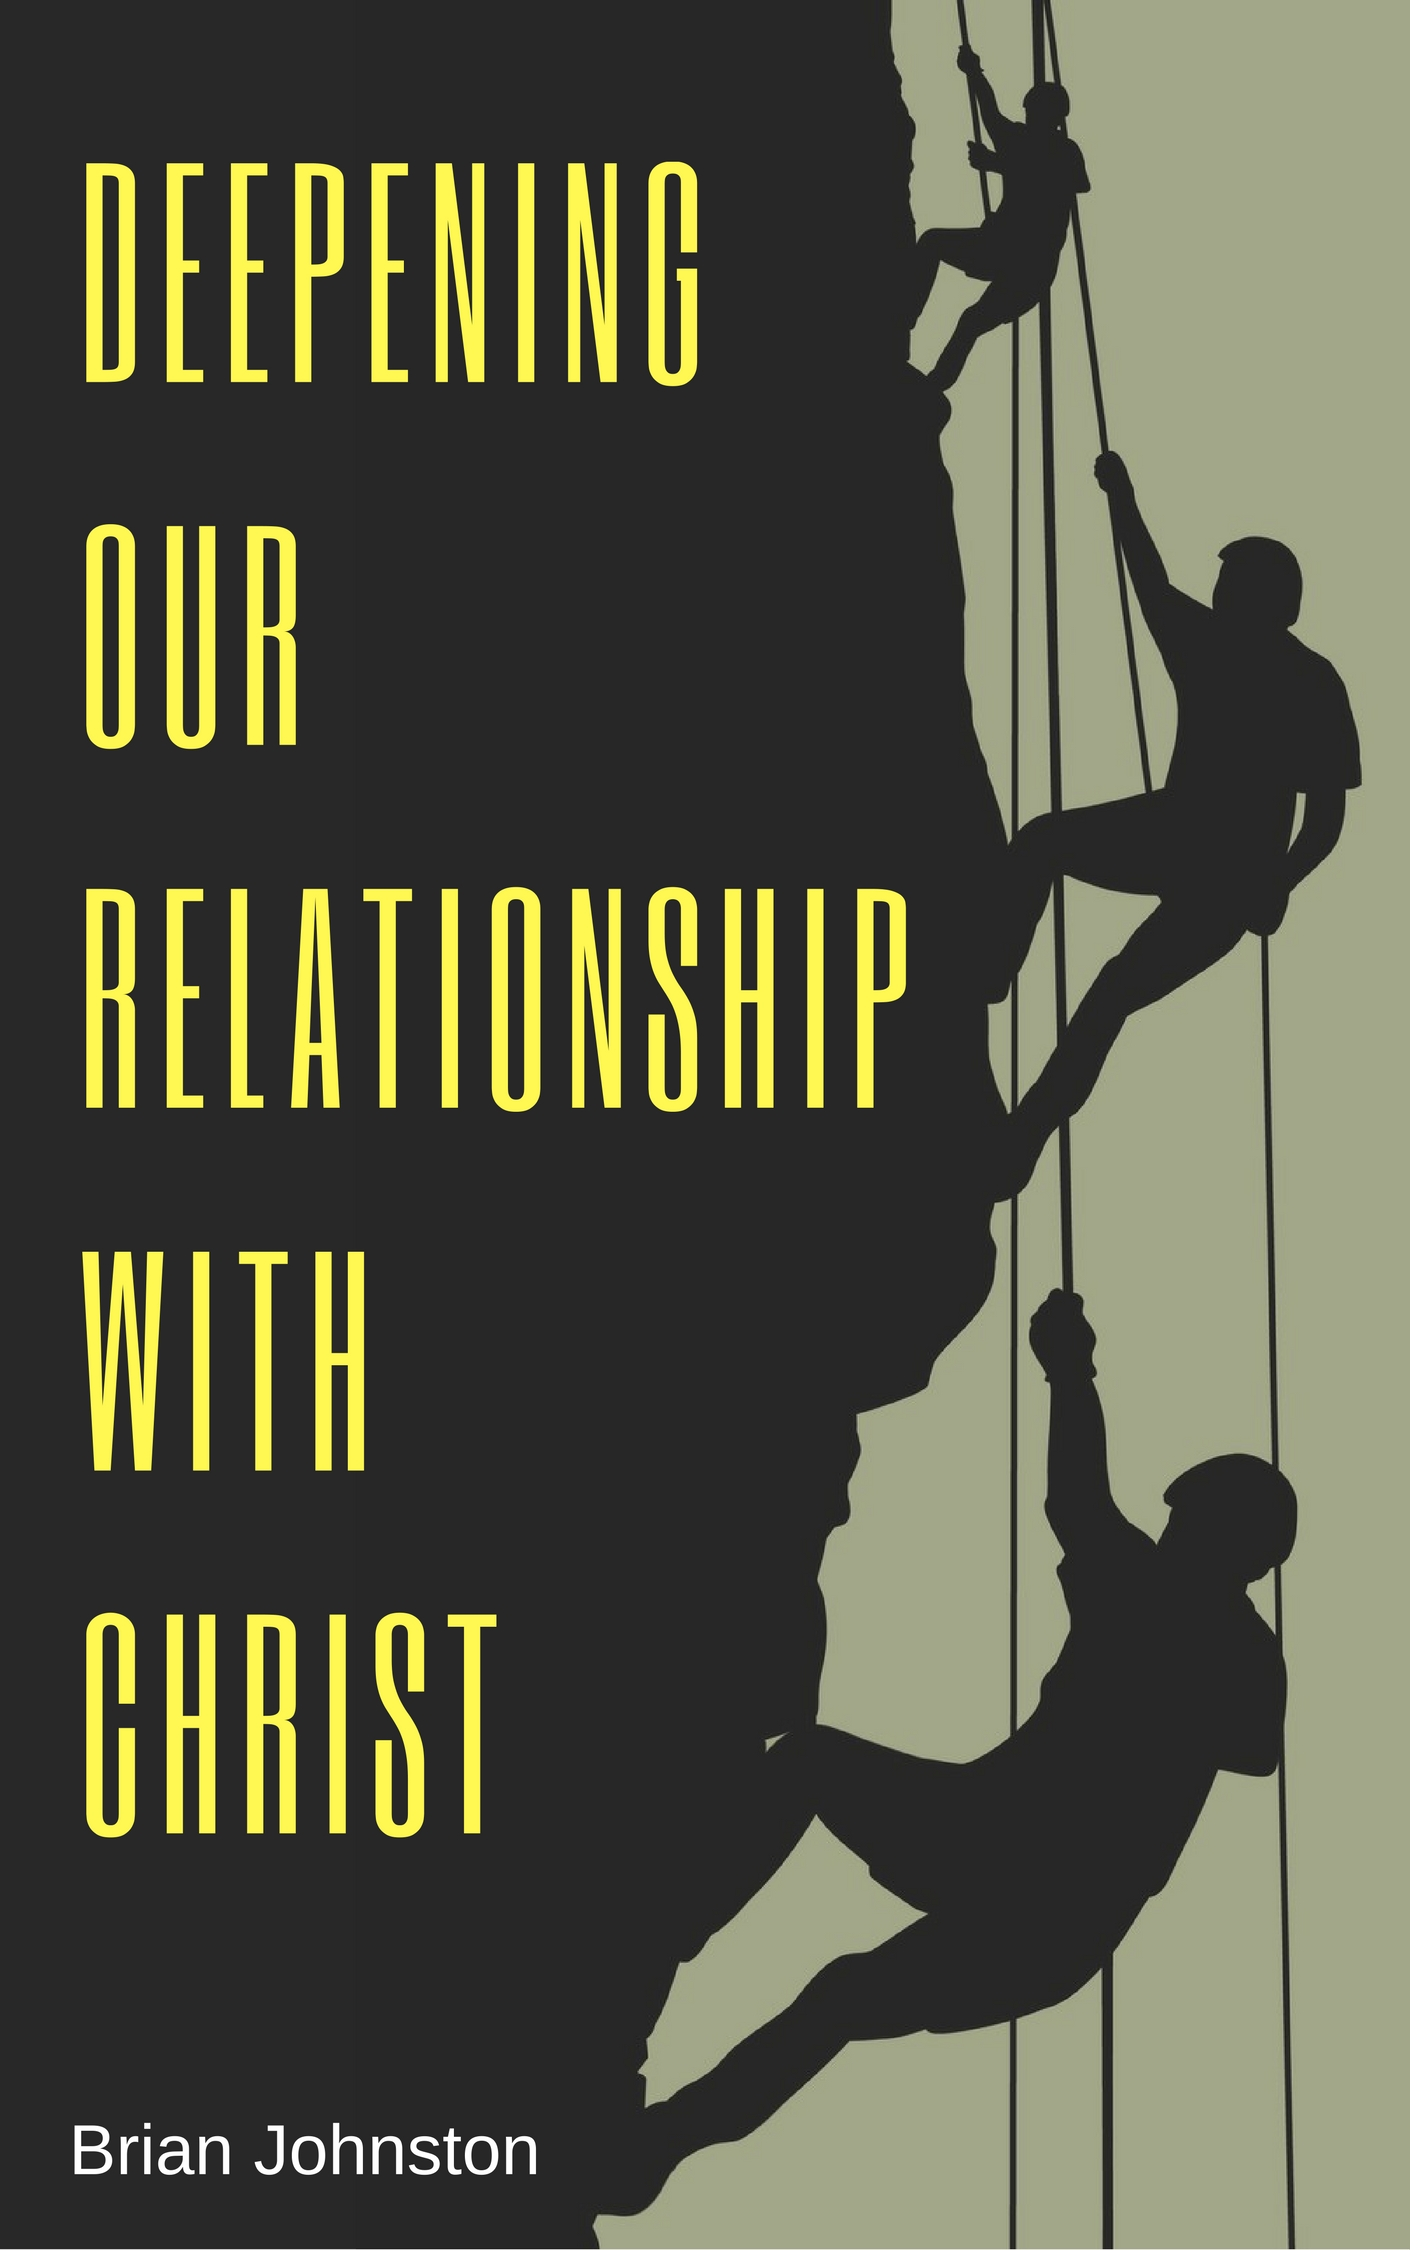 Deepening Our Relationship With Christ: Part 8 - In Remembering Him